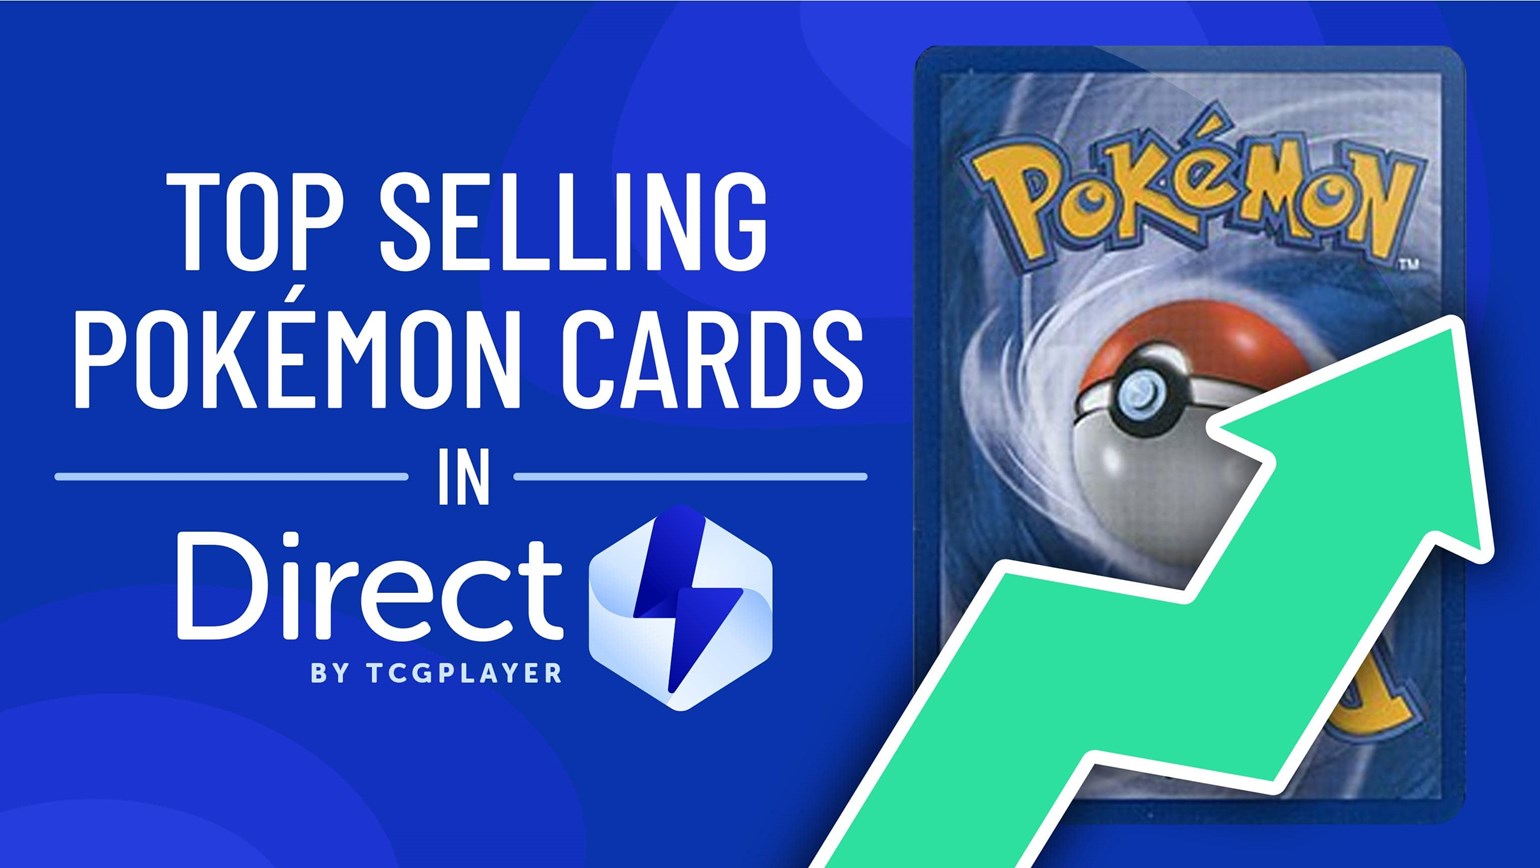 September Top Selling Pokémon Cards Under $25 in Direct by TCGplayer